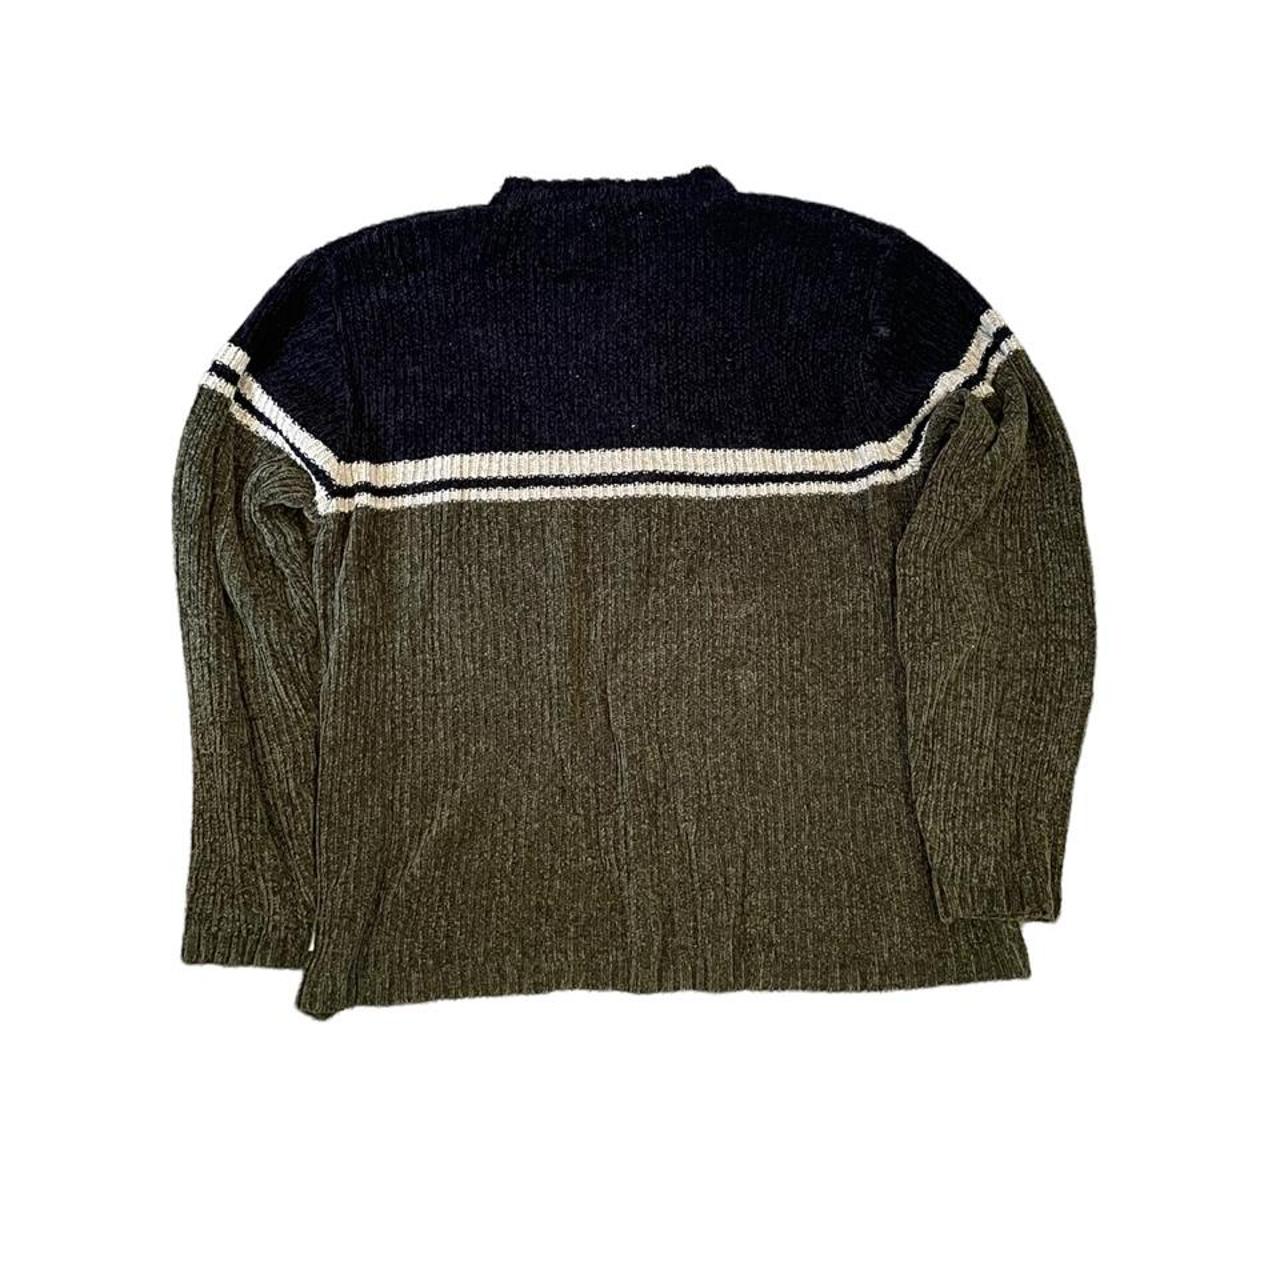 Product Image 2 - Knitted Crew Neck

Grandpa Sweater

Fluffy and